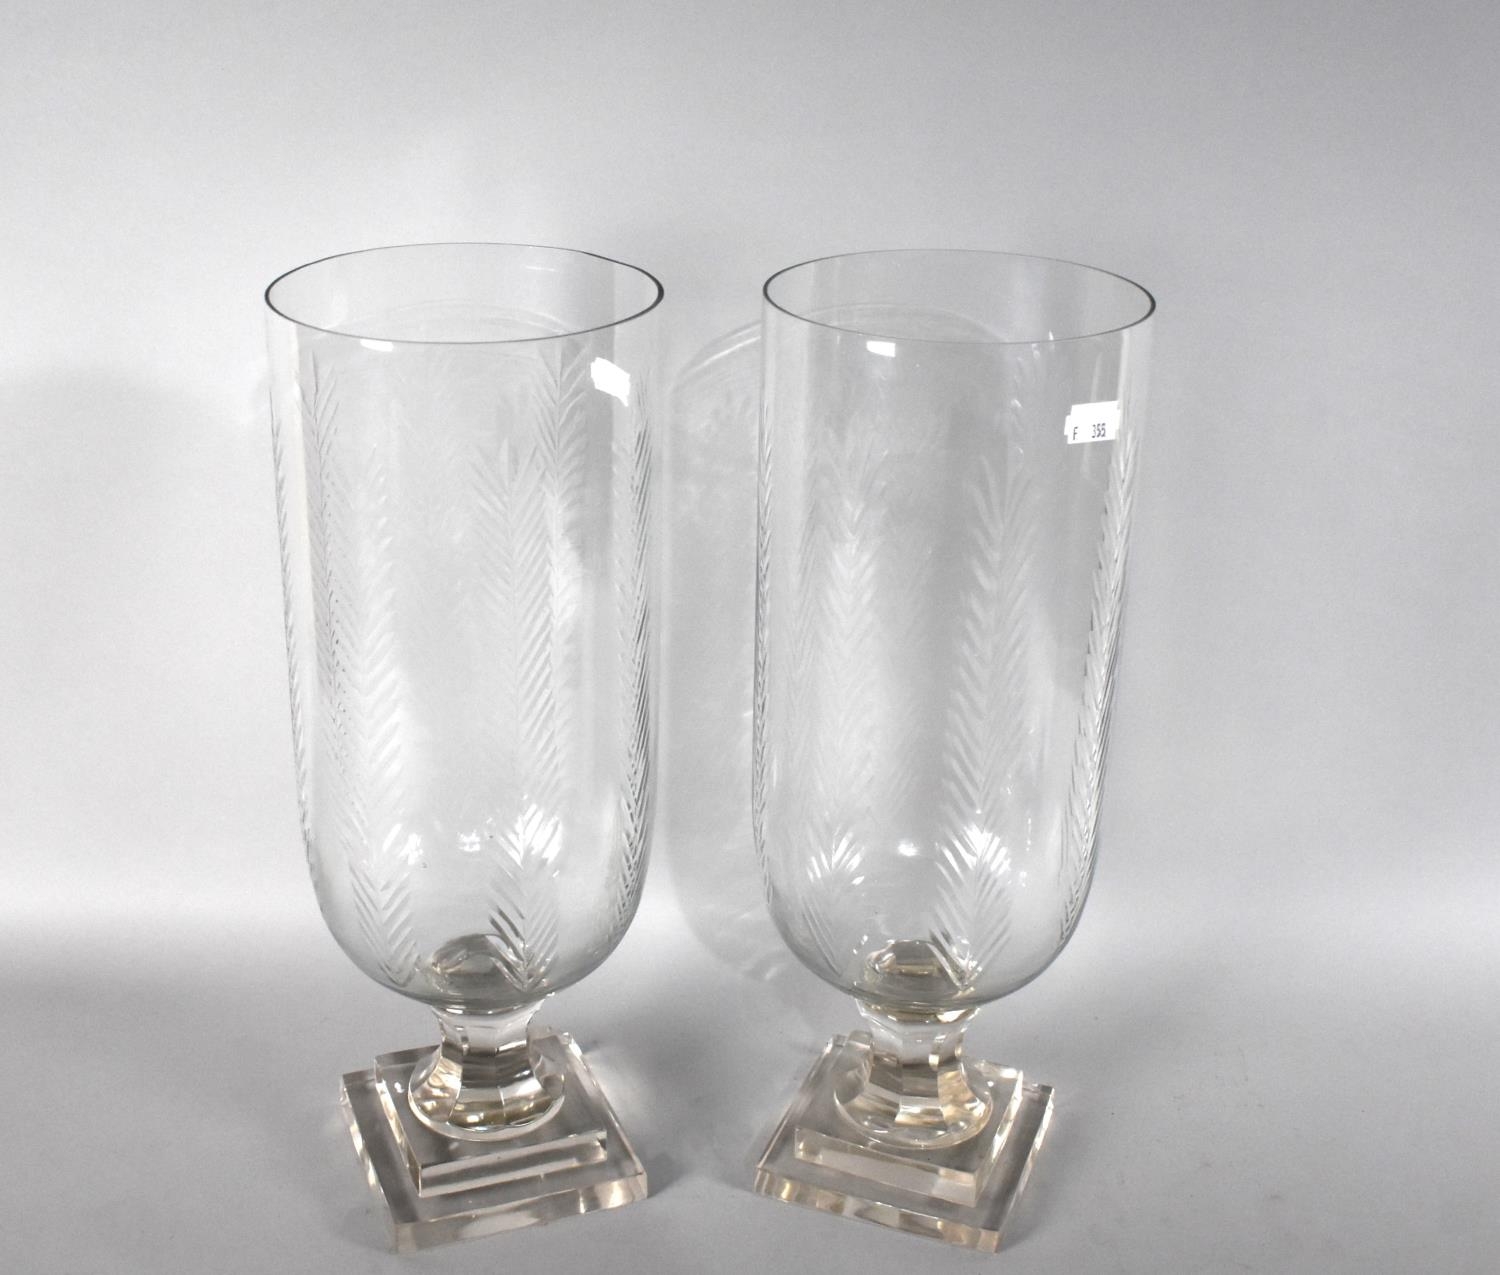 A Pair of Cylindrical Glass Hurricane Lamps, 39.5cms High - Image 2 of 2